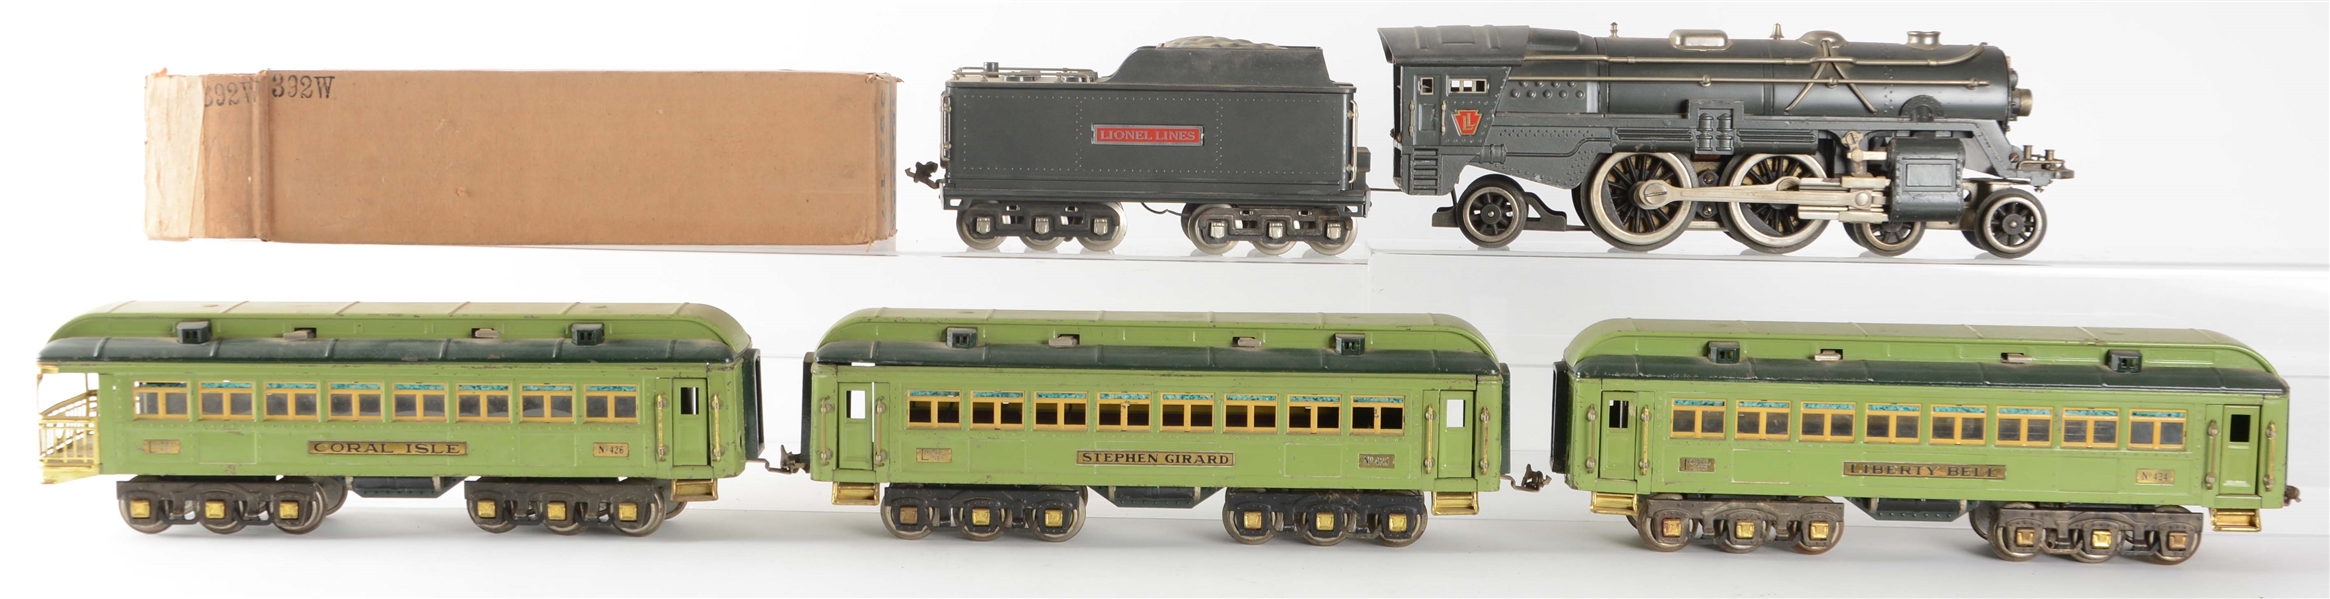 LOT OF 5: LIONEL 392 LOCOMOTIVE & TENDER WITH STEPHEN GIRARD CARS ONE WITH BOX. 